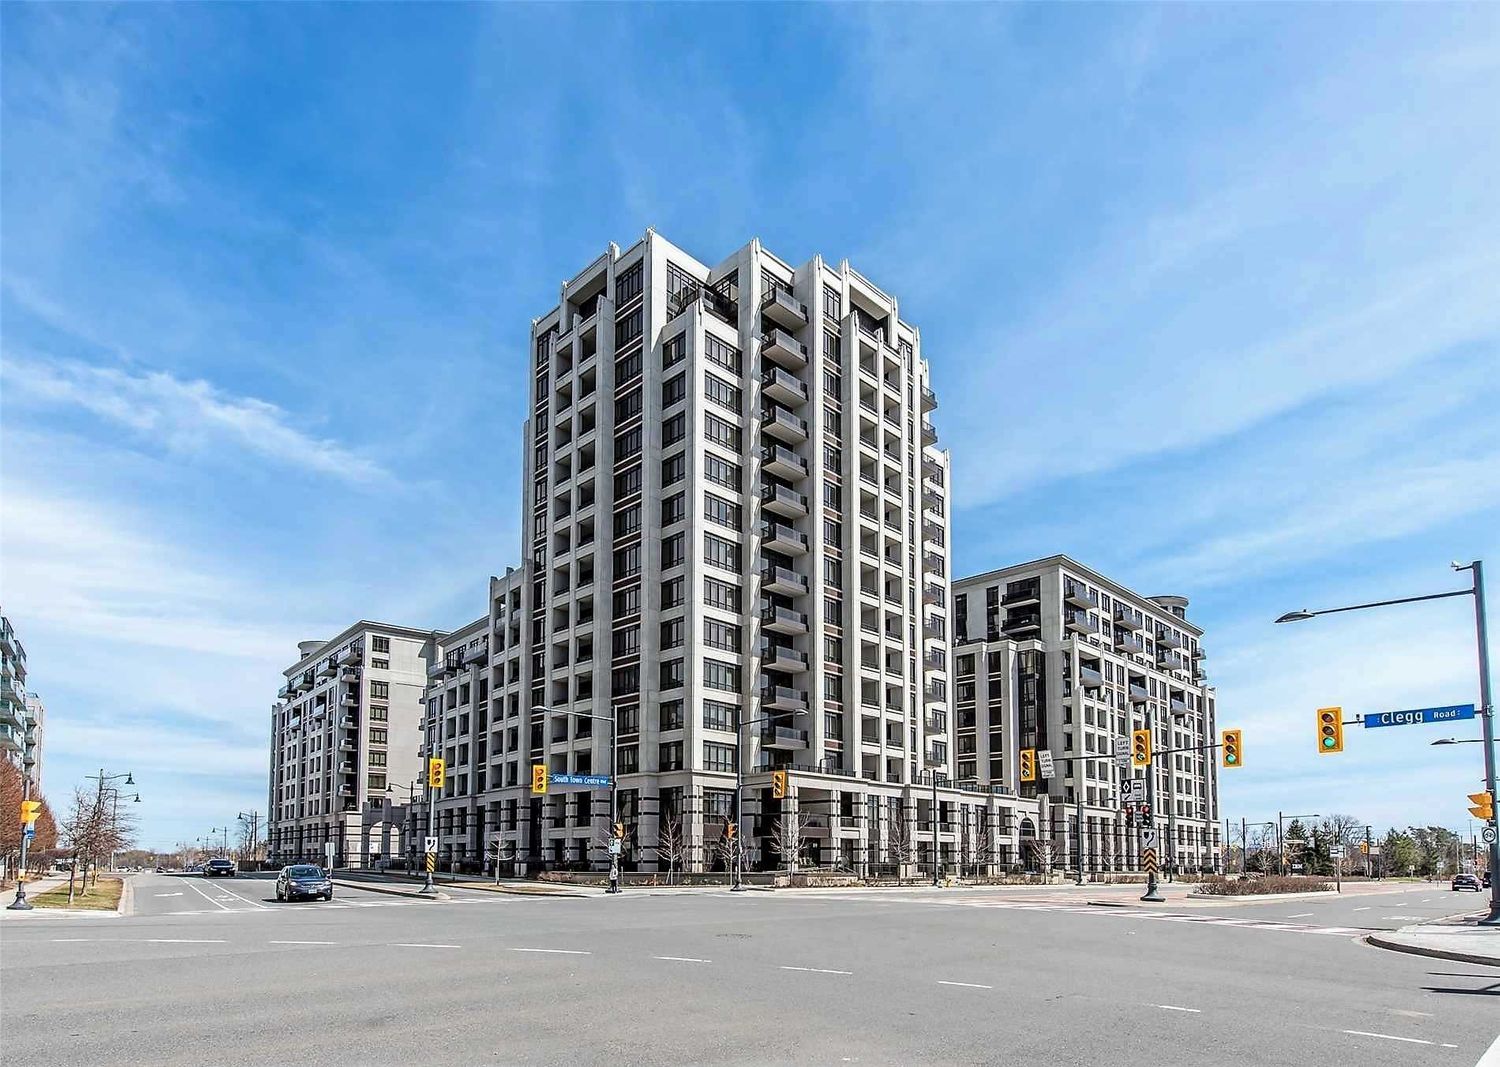 33 Clegg Road. Fontana Condos is located in  Markham, Toronto - image #1 of 2